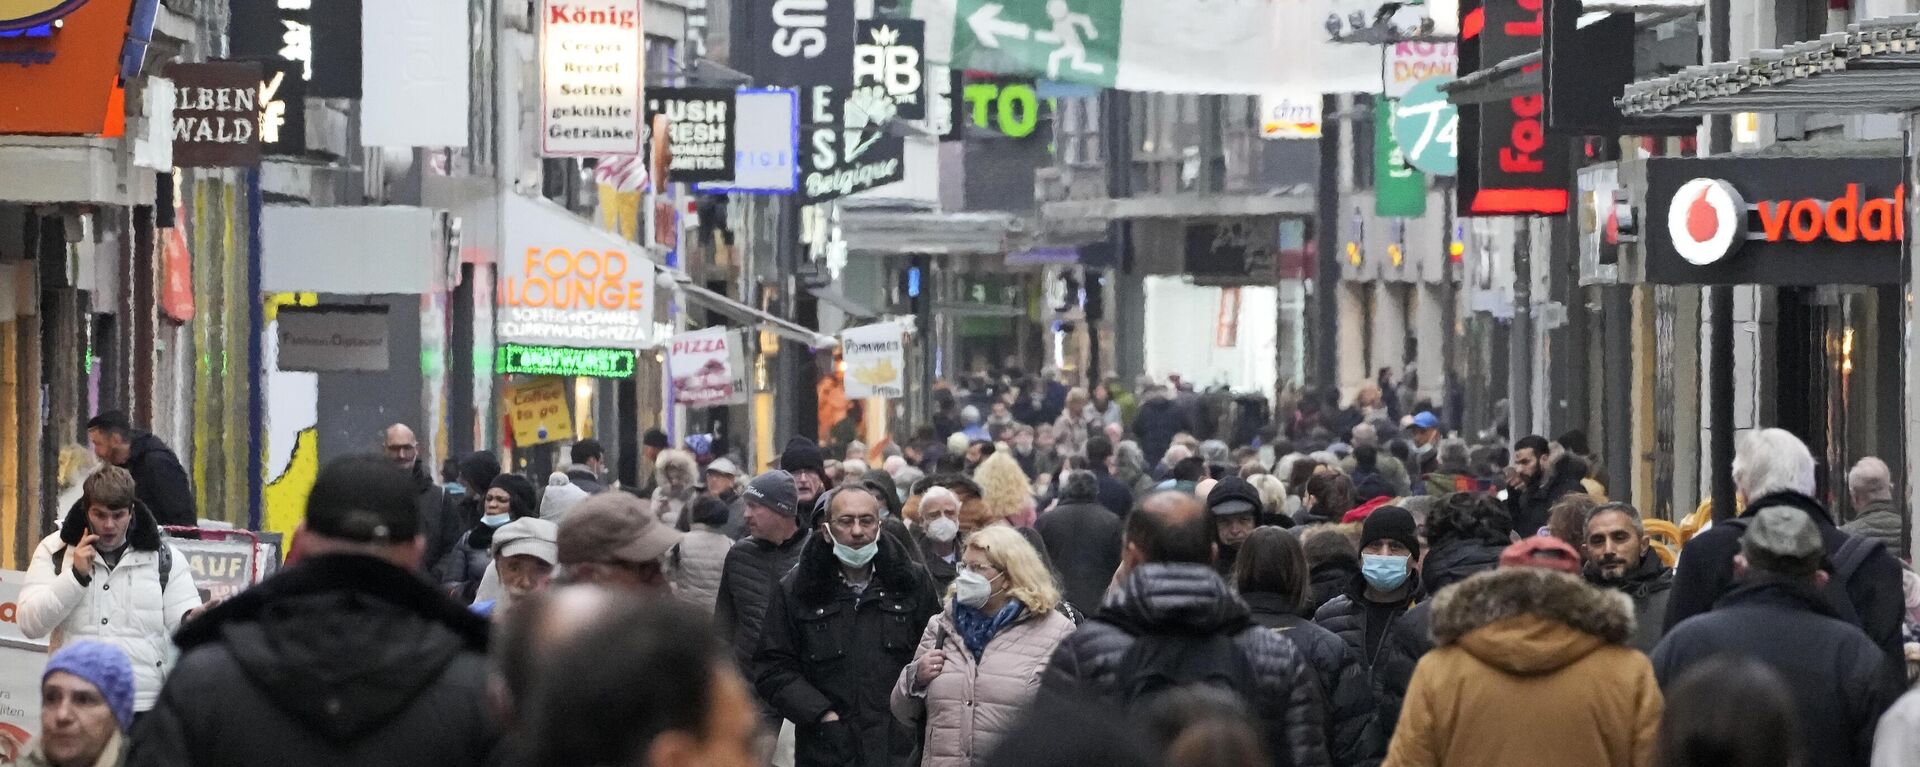 People fill up the shopping streets in Cologne, Germany, Wednesday, Nov. 17, 2021 - Sputnik International, 1920, 06.10.2022